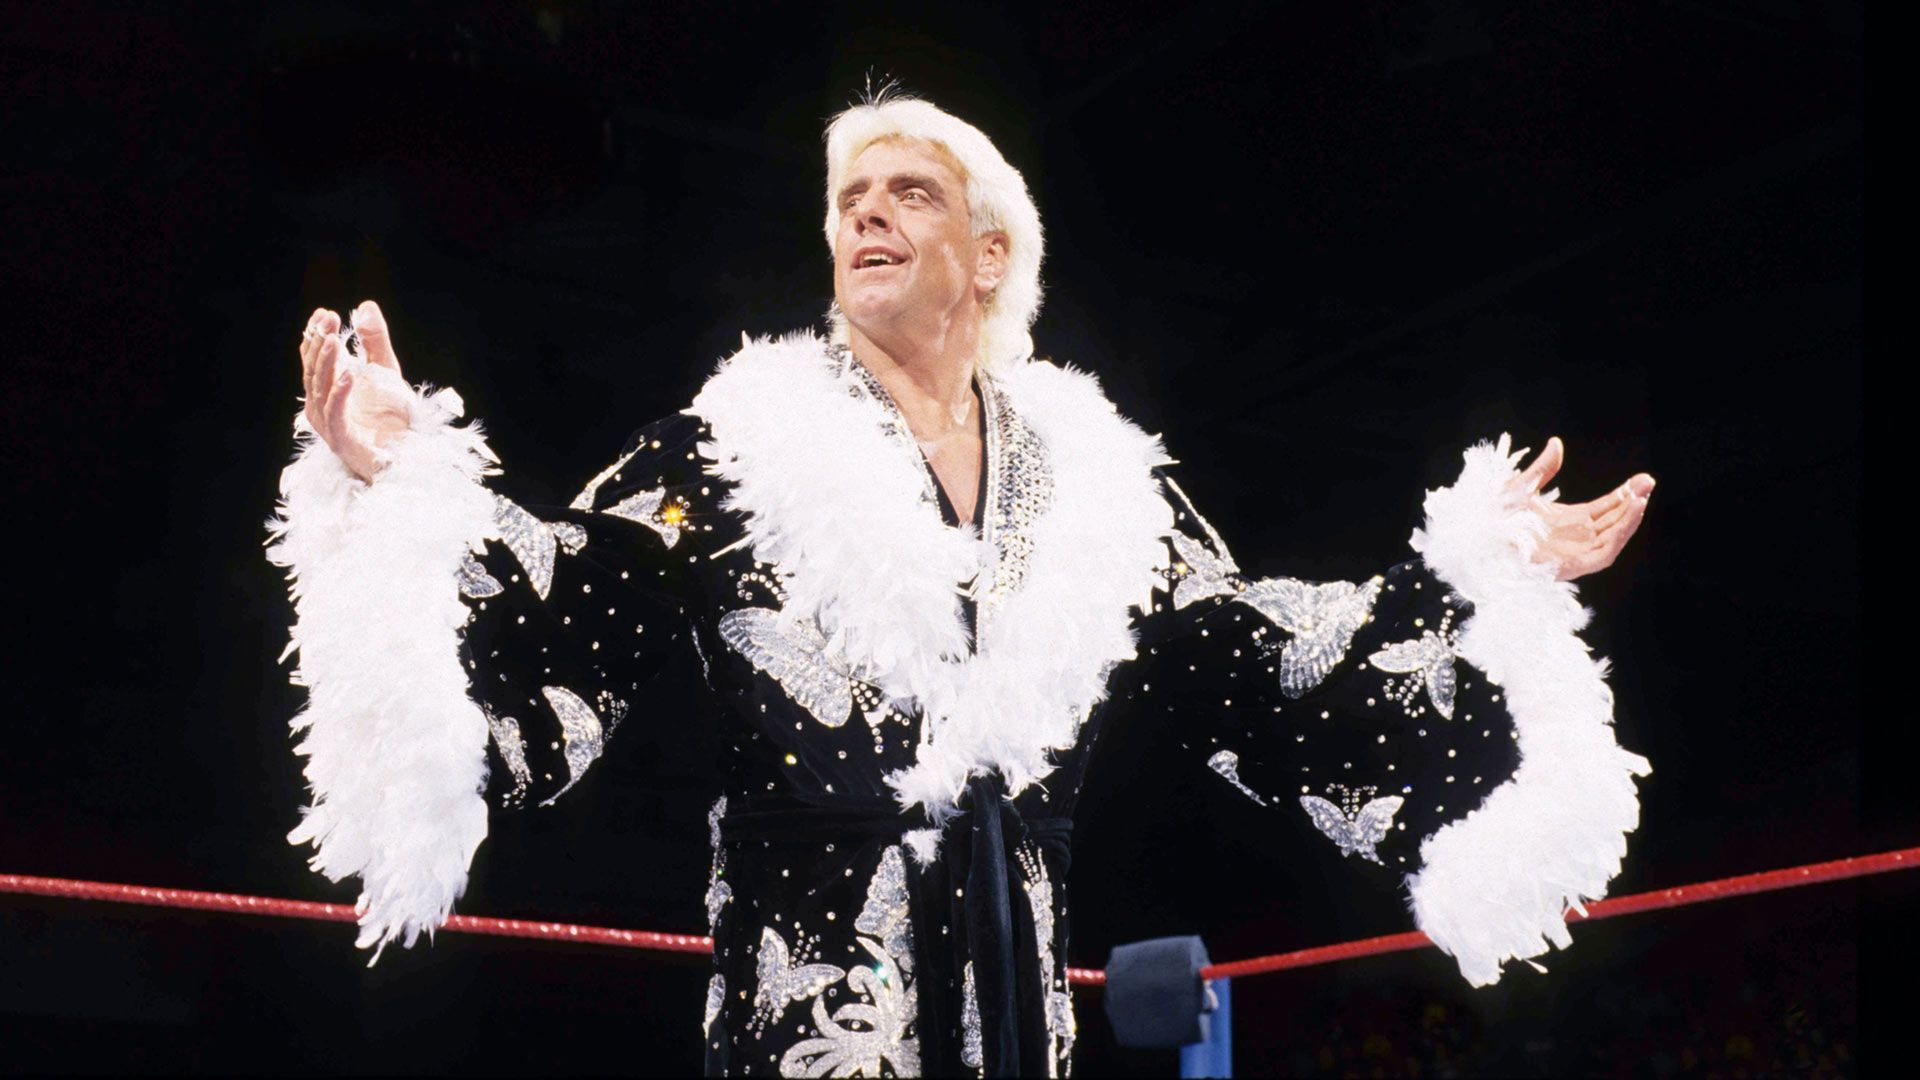 Ric Flair is well-known for wearing spectacular robes to the ring for his matches